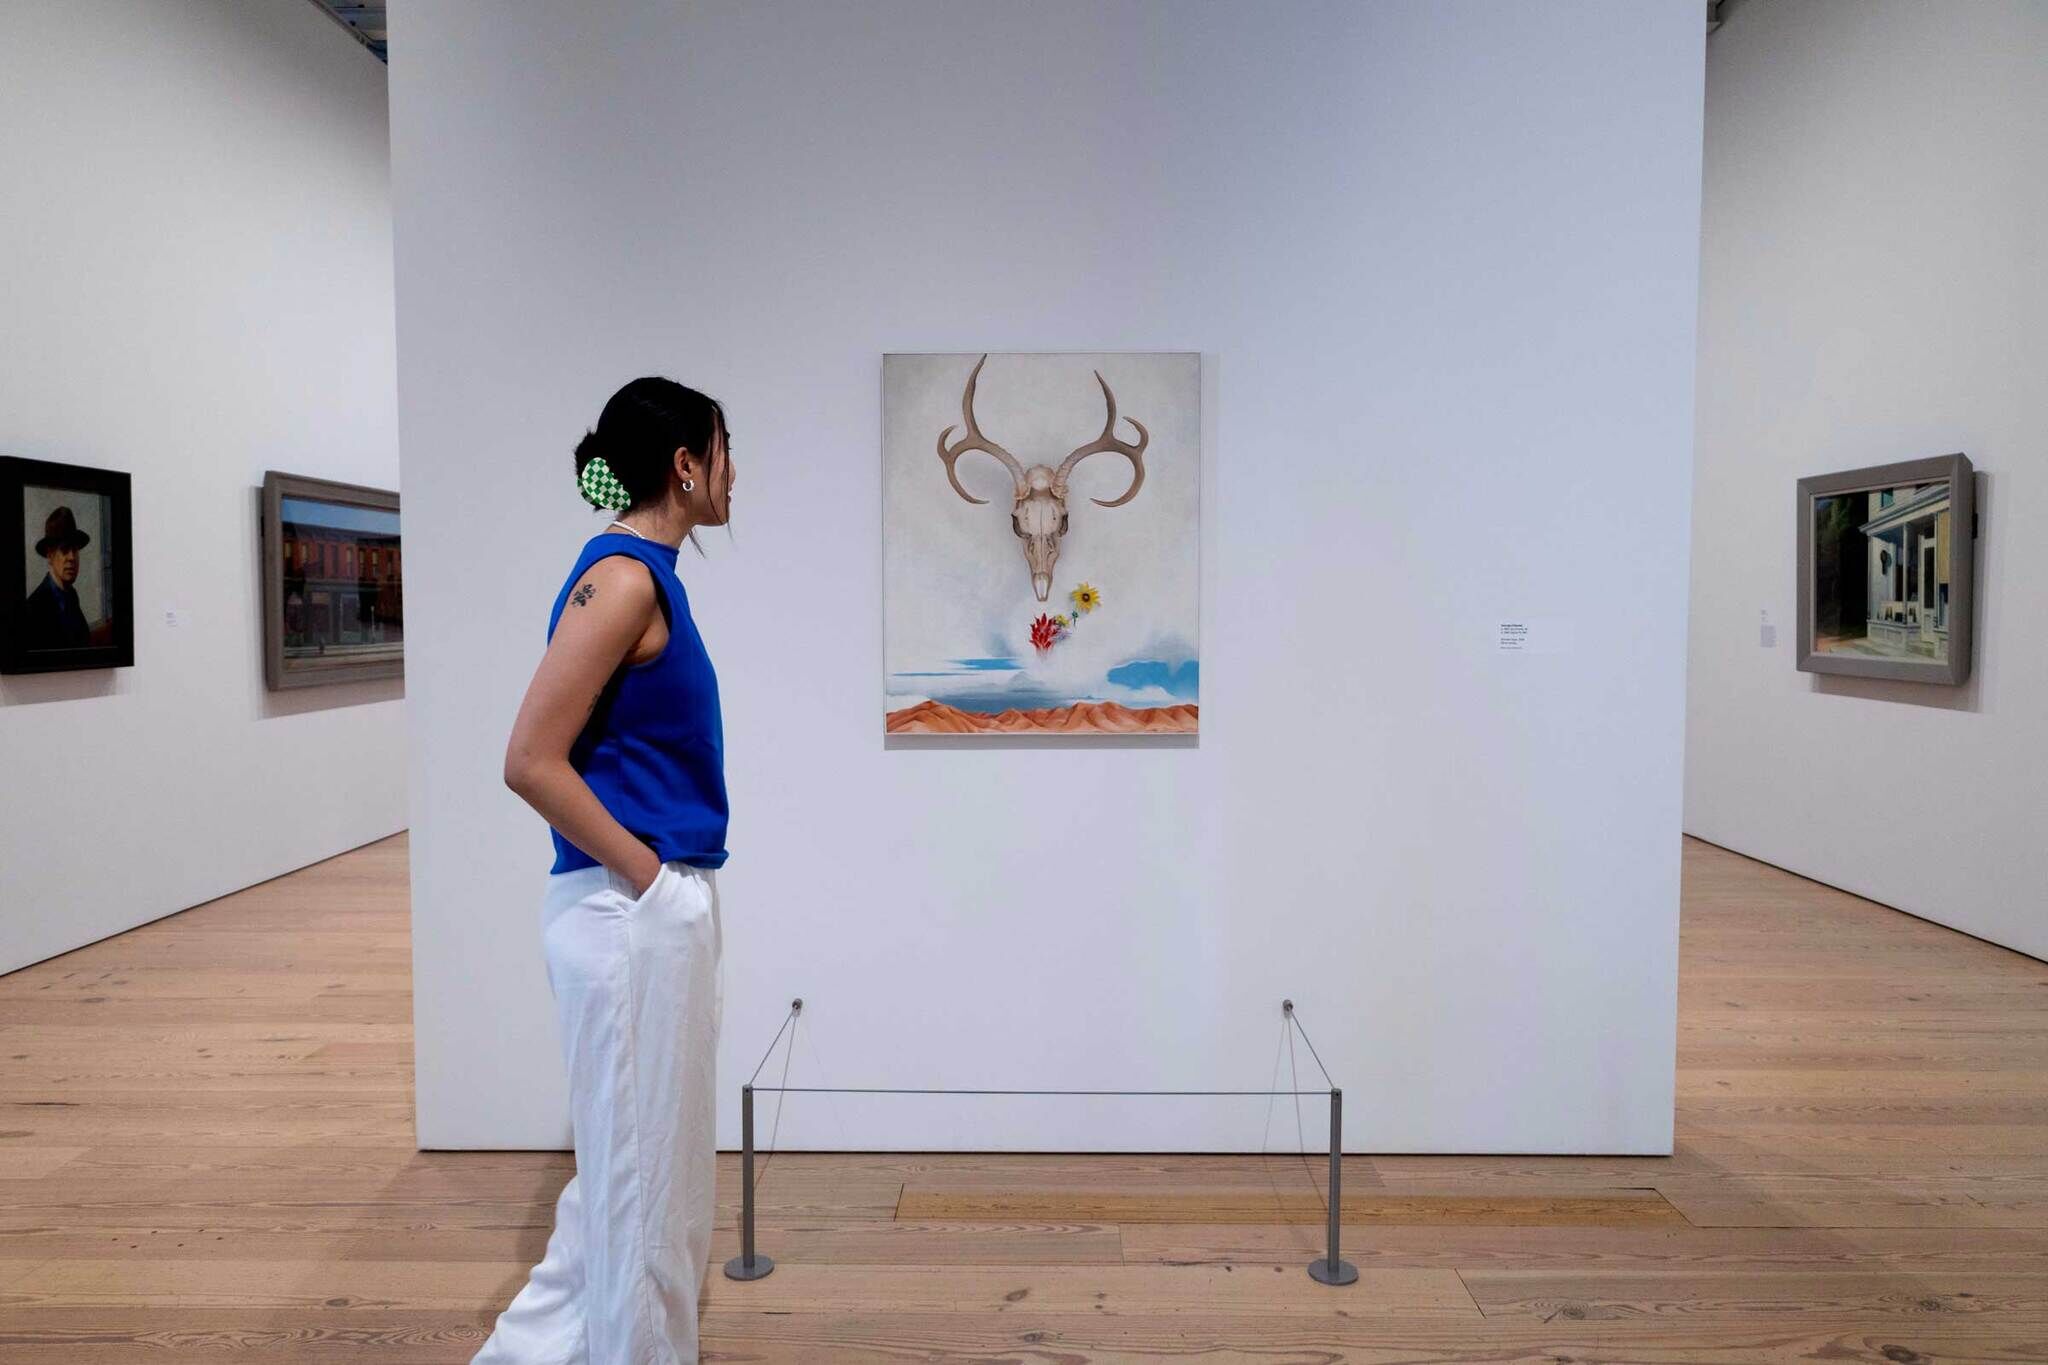 A woman in a blue top and white pants observes a painting of a skull with antlers in an art gallery. Other artworks are visible on the walls.